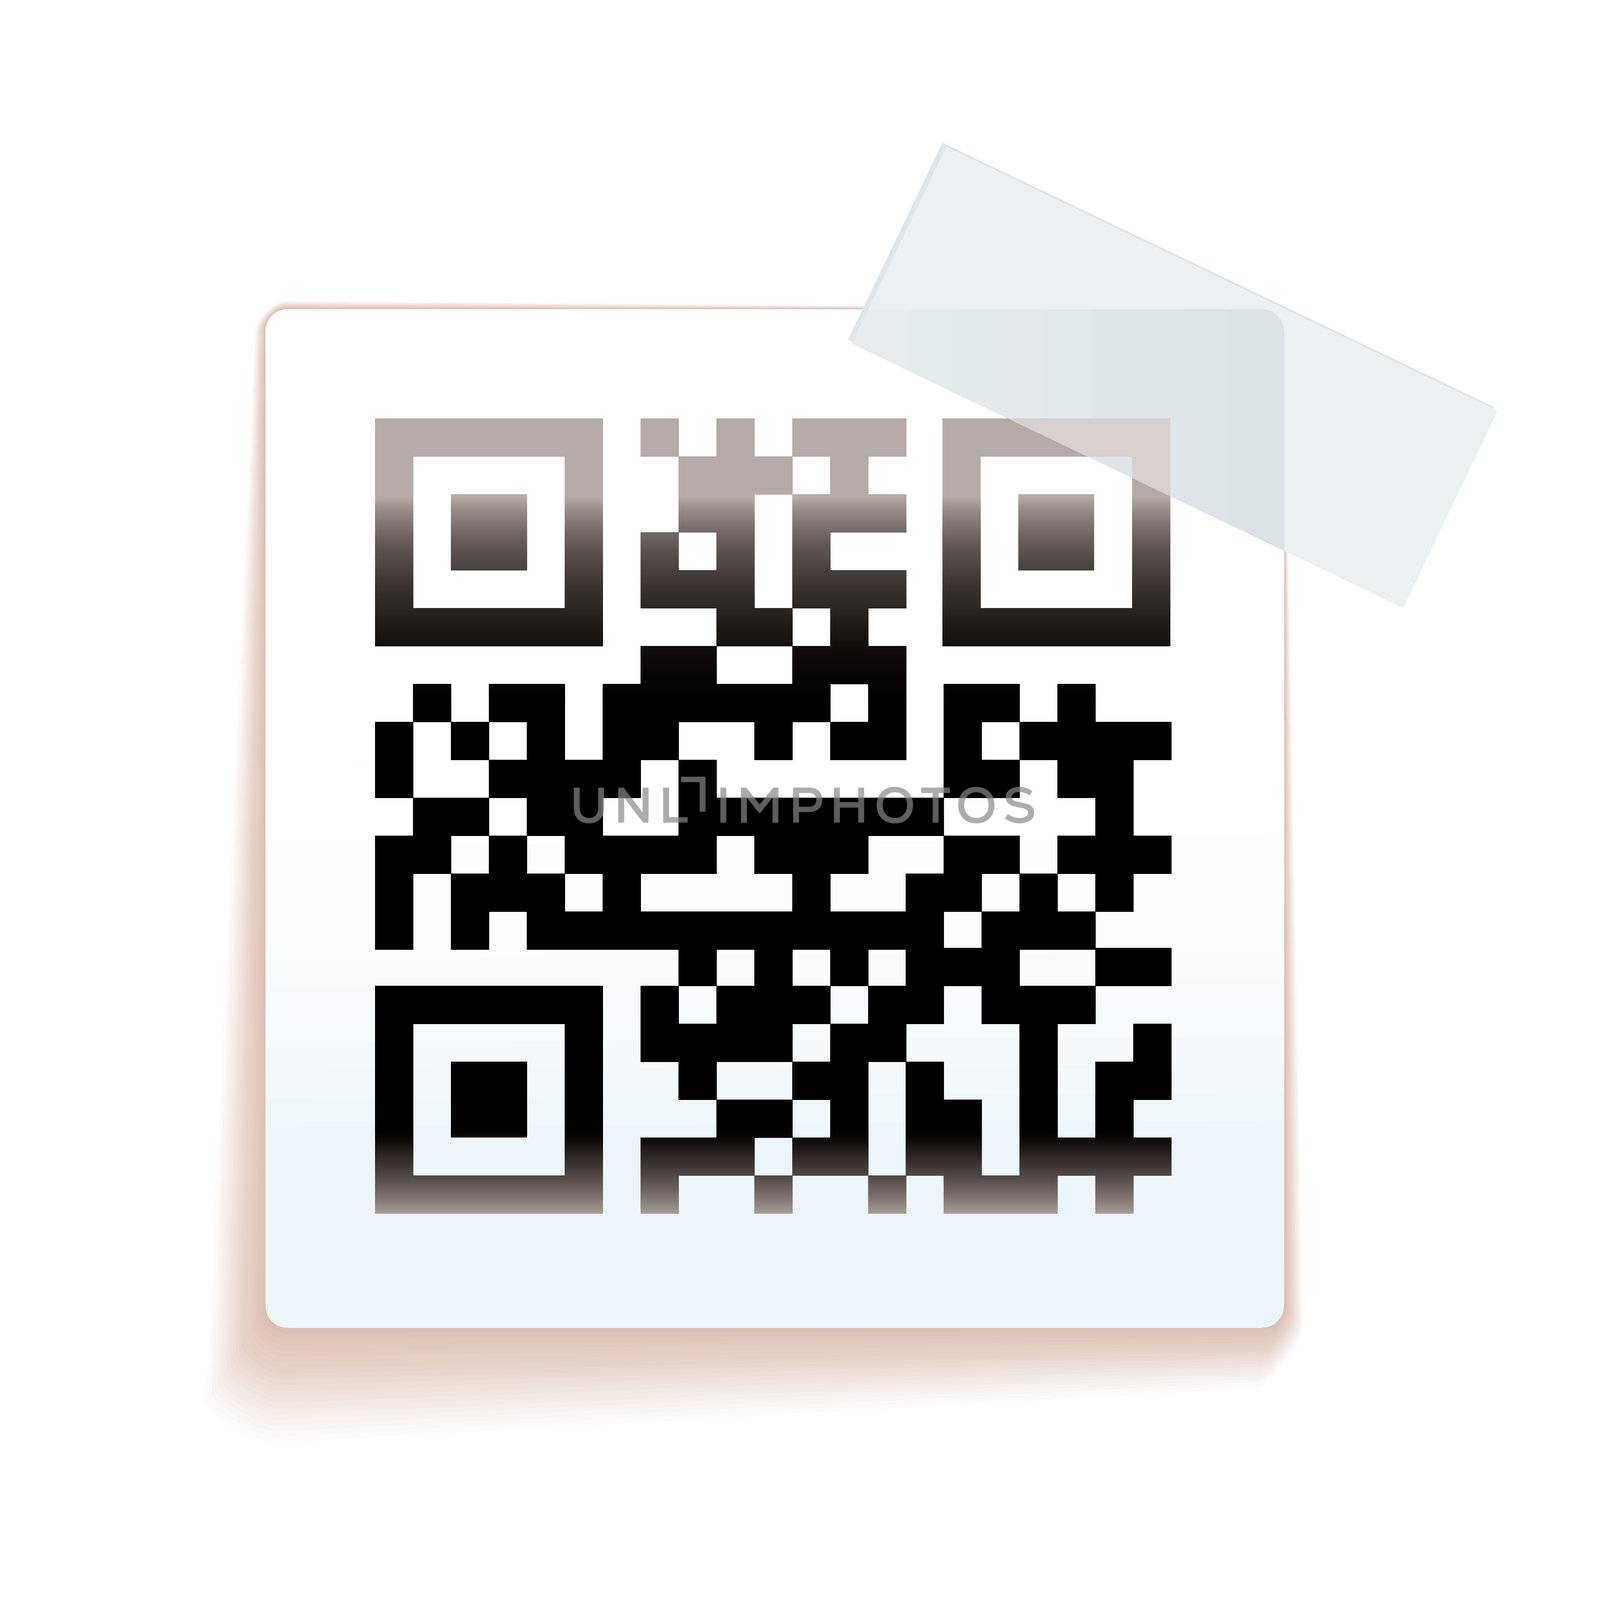 White square paper tag with sticky tape and sale QR code